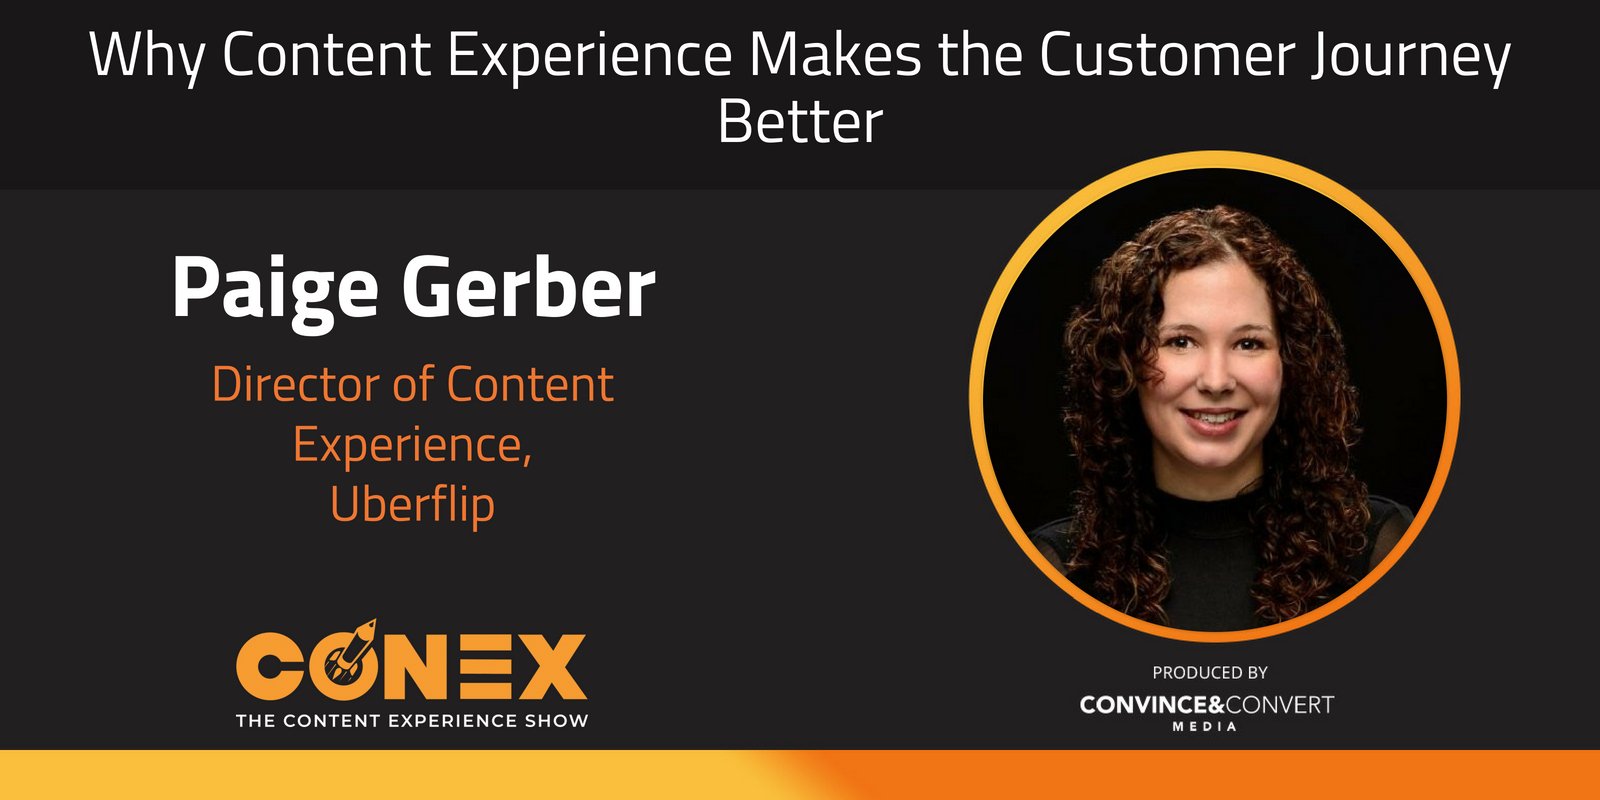 Why Content Experience Makes the Customer Journey Better